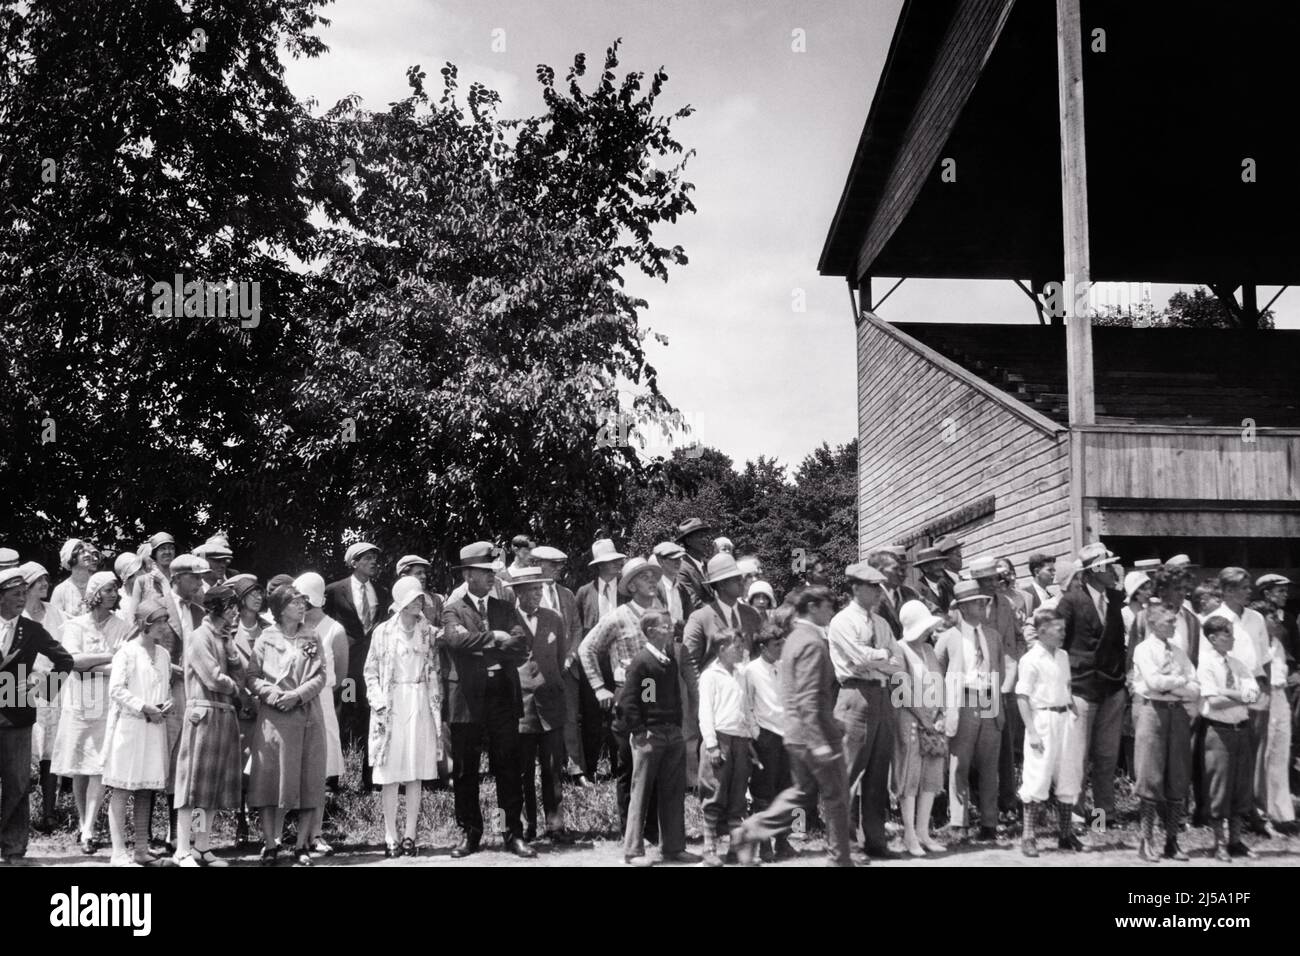 1920s CROWD OF PEOPLE SPECTATORS MEN WOMEN CHILDREN NEXT TO GRANDSTANDS AT CHENANGO COUNTY FAIRGROUNDS NORWICH NY USA - q75047 CPC001 HARS LIFESTYLE HISTORY CELEBRATION CROWDS FEMALES MARRIED ASSEMBLY EVENT SPOUSE HUSBANDS COPY SPACE FULL-LENGTH LADIES MASS COUNTY PERSONS MALES TEENAGE GIRL TEENAGE BOY ENTERTAINMENT NY NEXT SPECTATORS B&W GATHERING WIDE ANGLE RECREATION AT OF TO FAIRGROUNDS CONNECTION CONCEPTUAL GRANDSTANDS NEW YORK STYLISH GRANDSTAND JUVENILES SEASON THRONG TOGETHERNESS WIVES ATTENDANCE BLACK AND WHITE BRIDE AND GROOM OLD FASHIONED Stock Photo